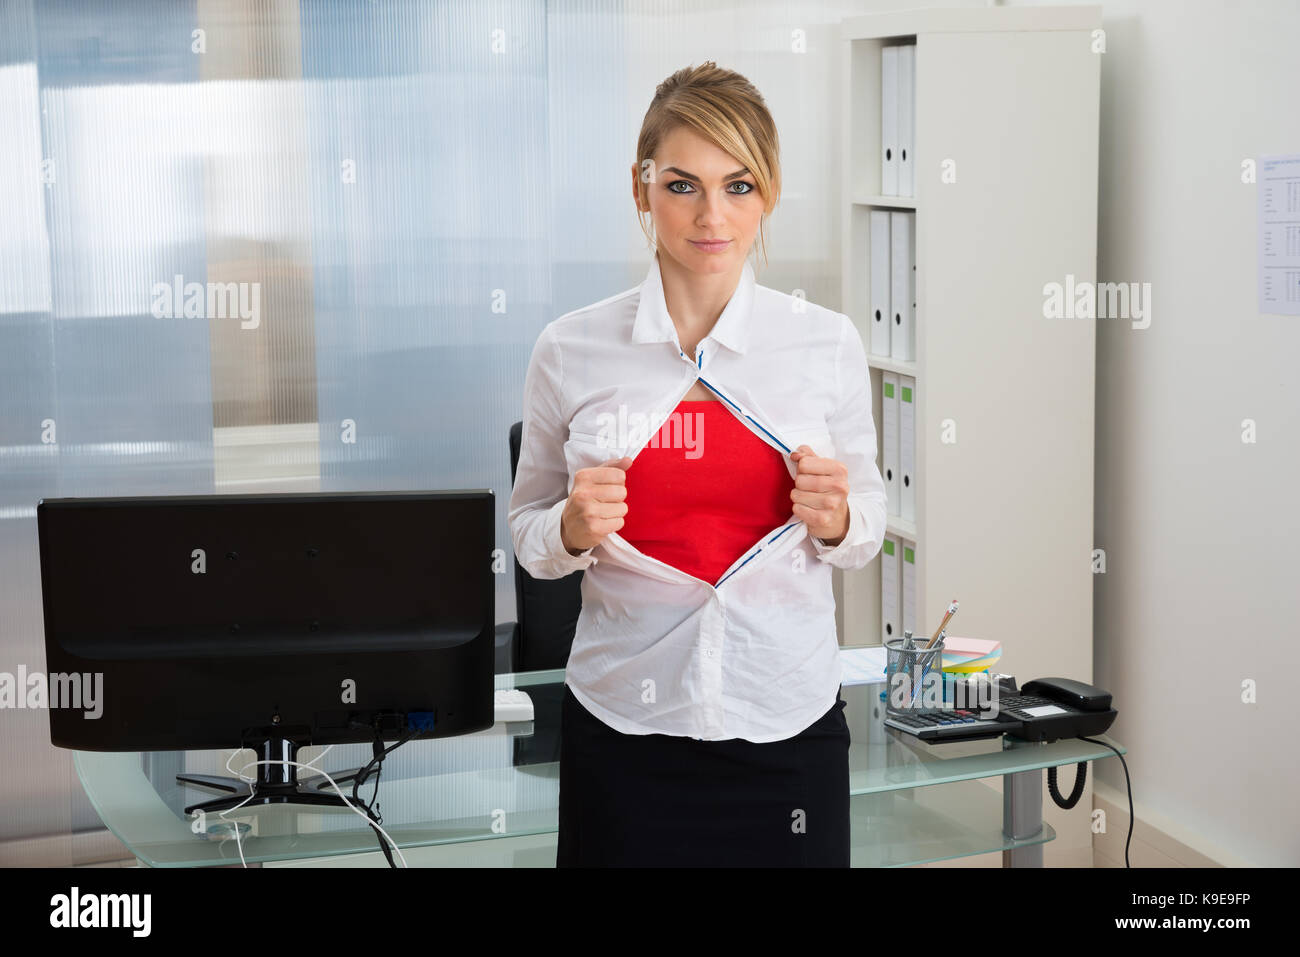 Portrait Of Young Businesswoman Tearing Her Shirt Revealing A Superhero Suit Stock Photo